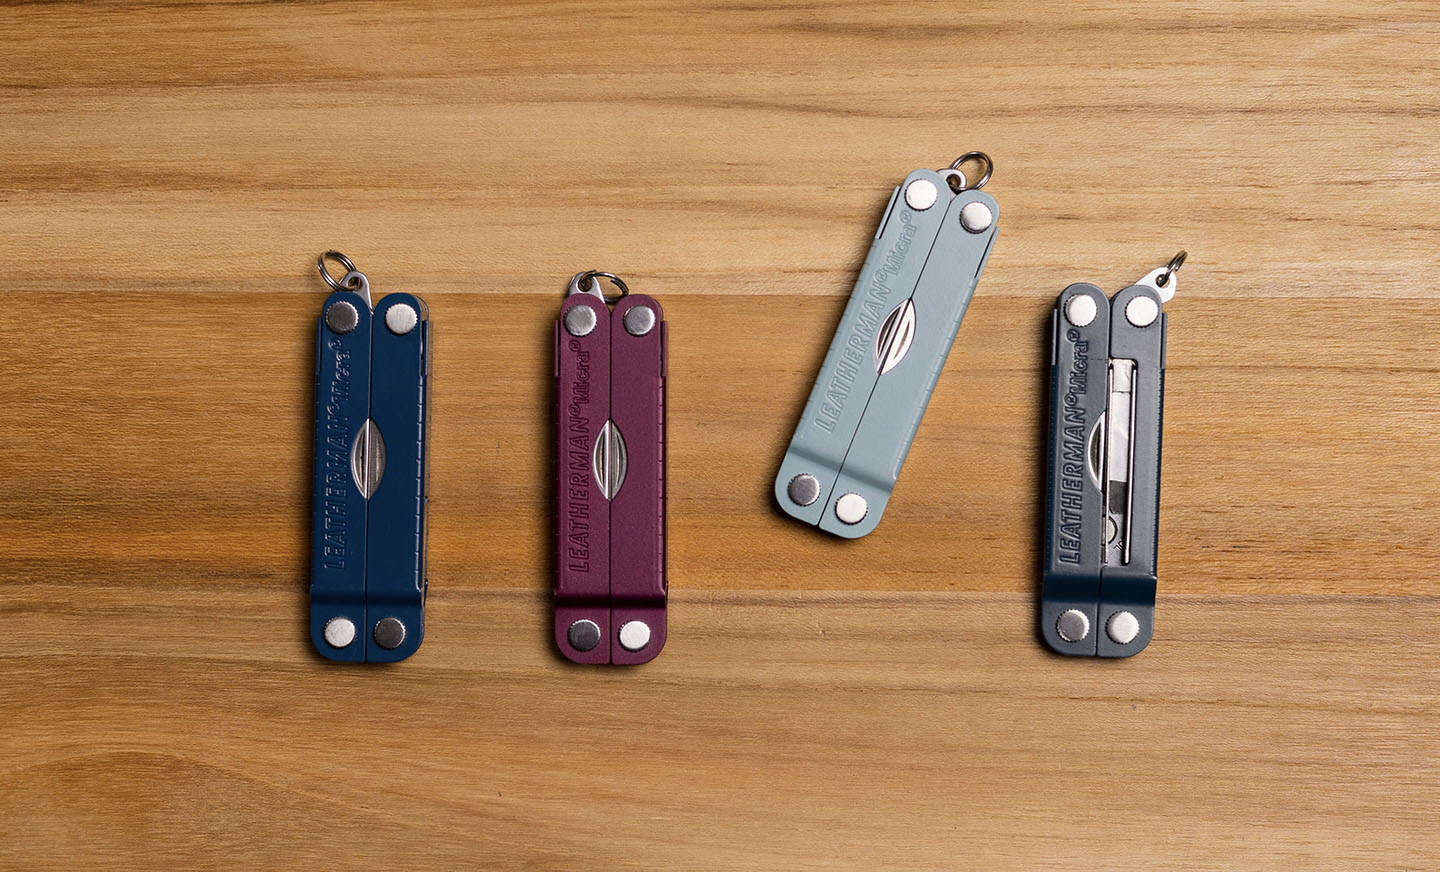 Leatherman Micra Keychain Multitool Review - The Multitool That Lives in My  EDC Pouch! 